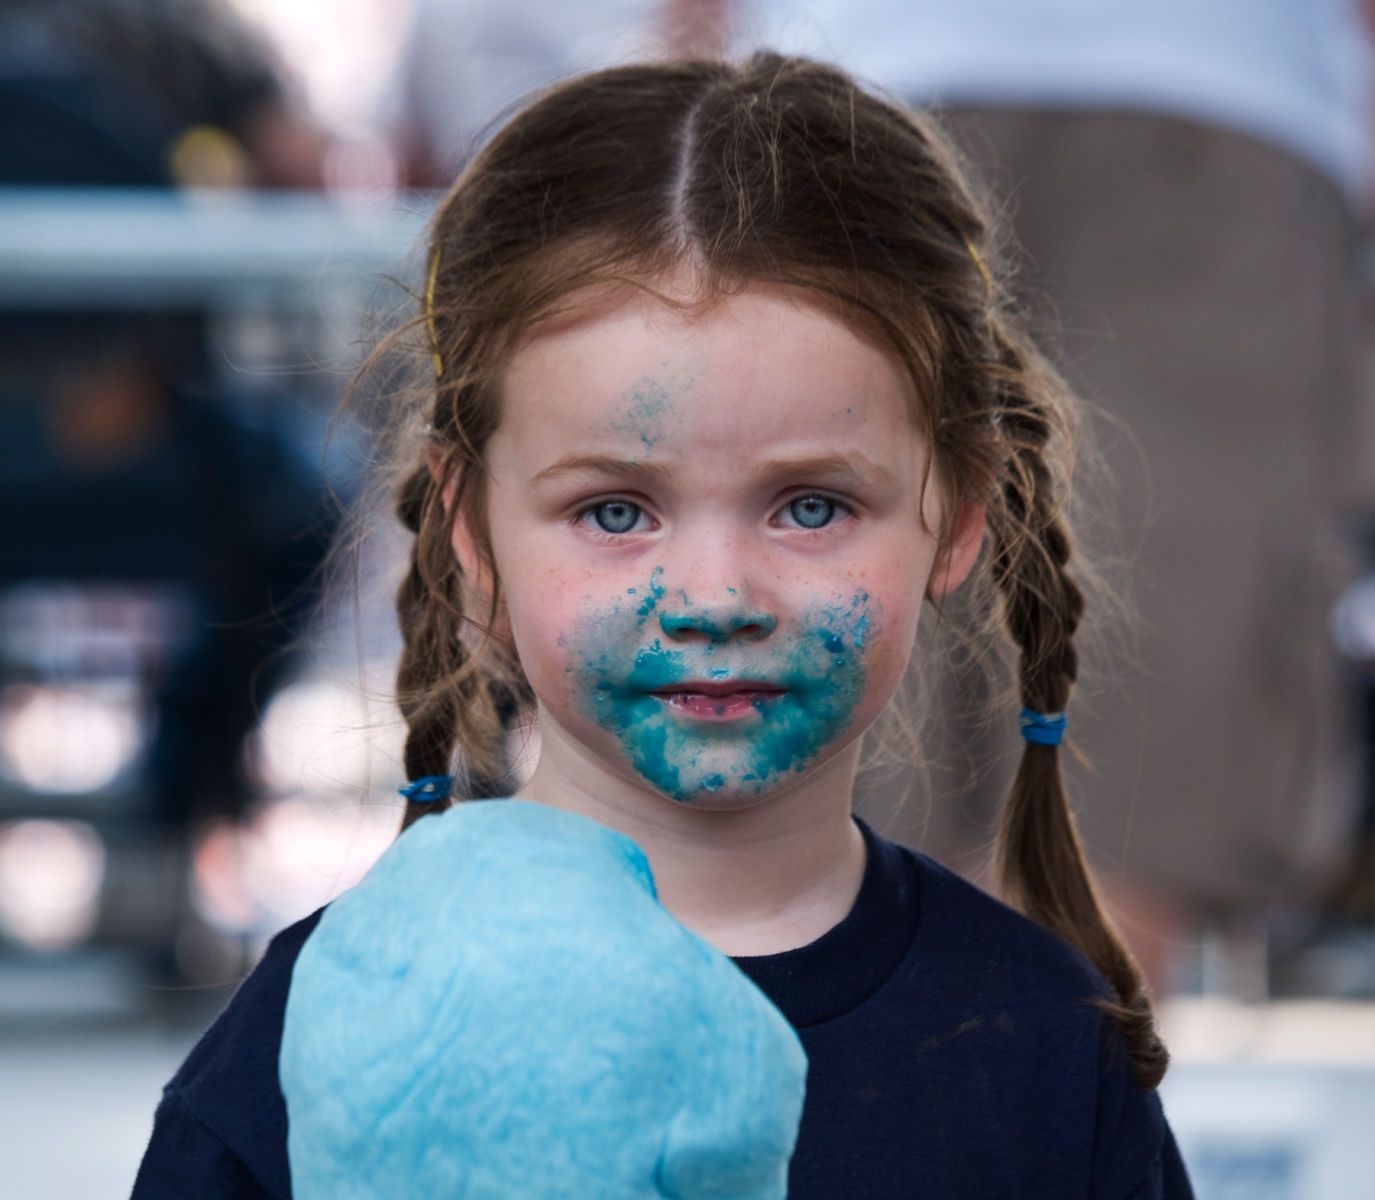 Girl & Blue Cotton Candy